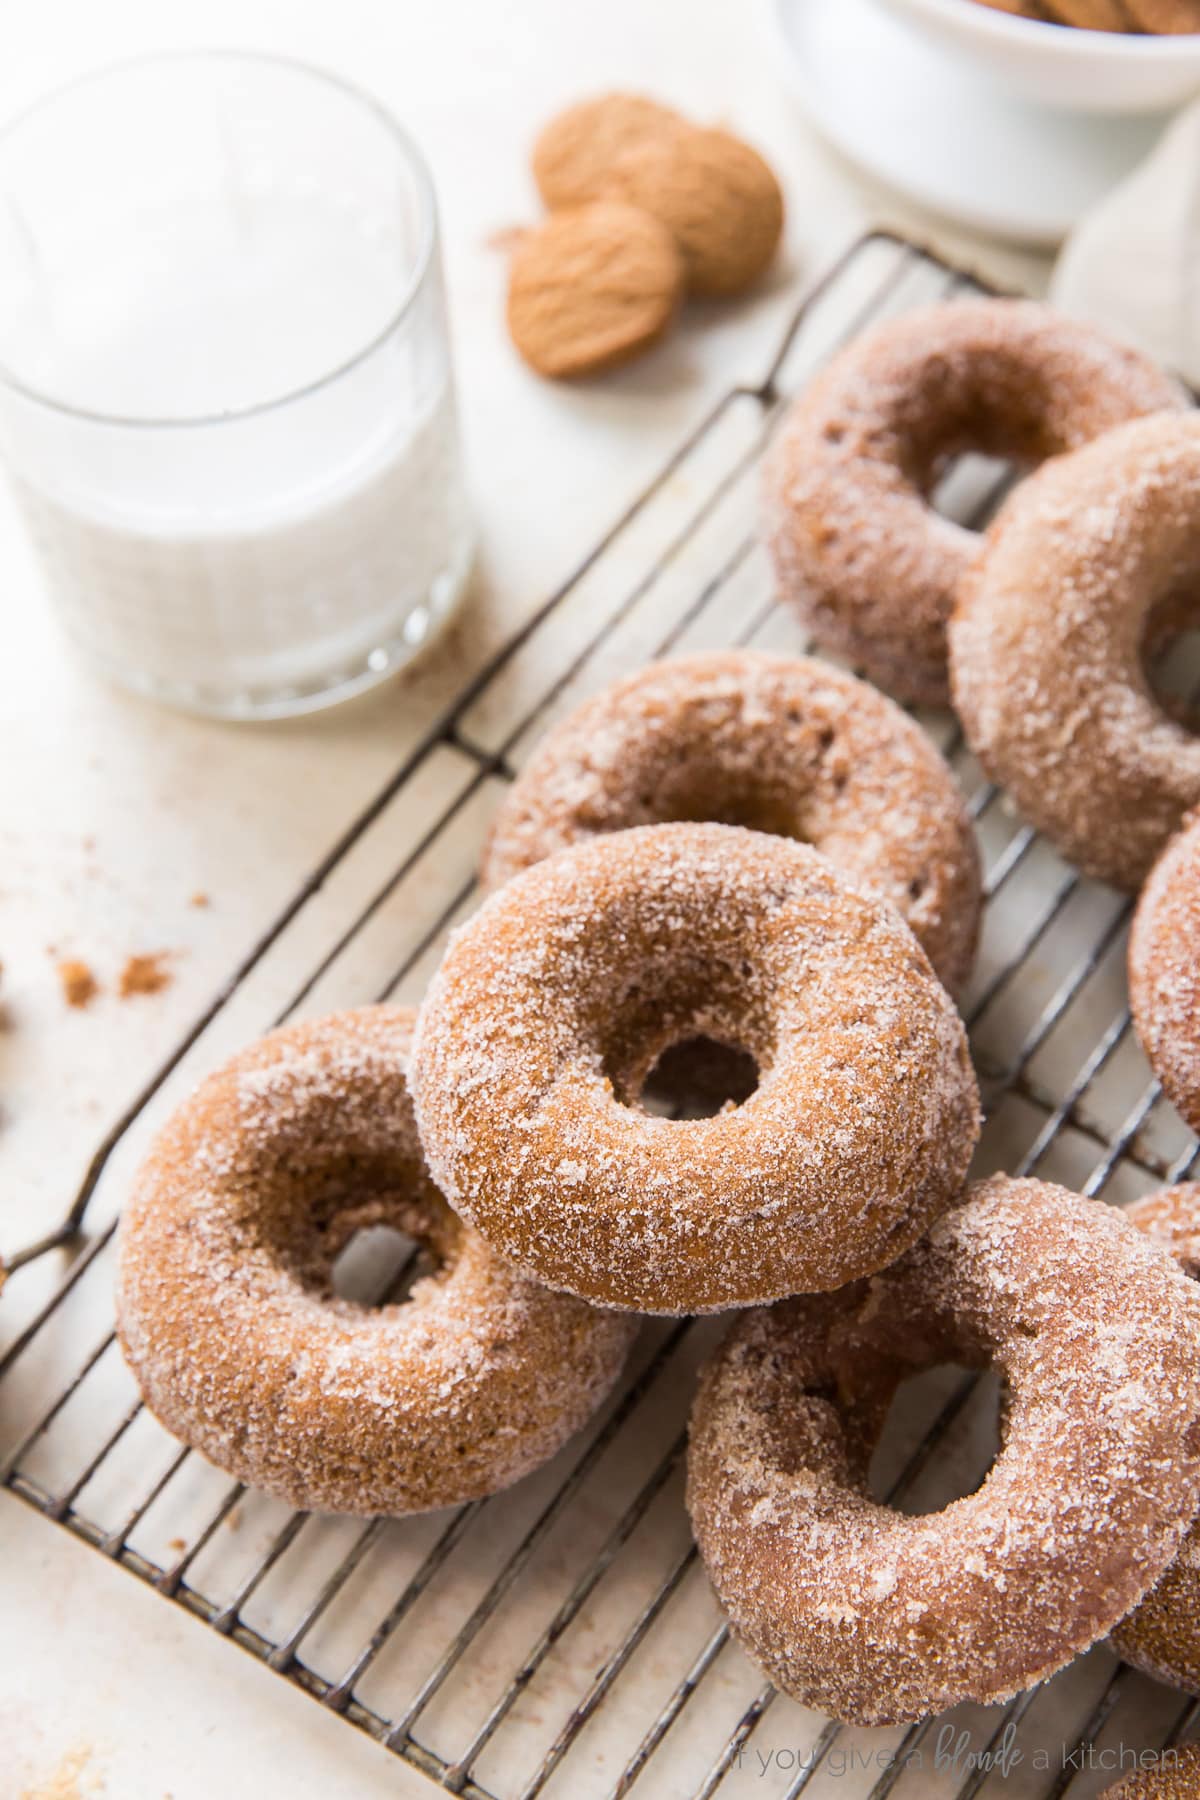 Gingerbread donuts with cinnamon sugar on wire cooling rack next to glass of milk